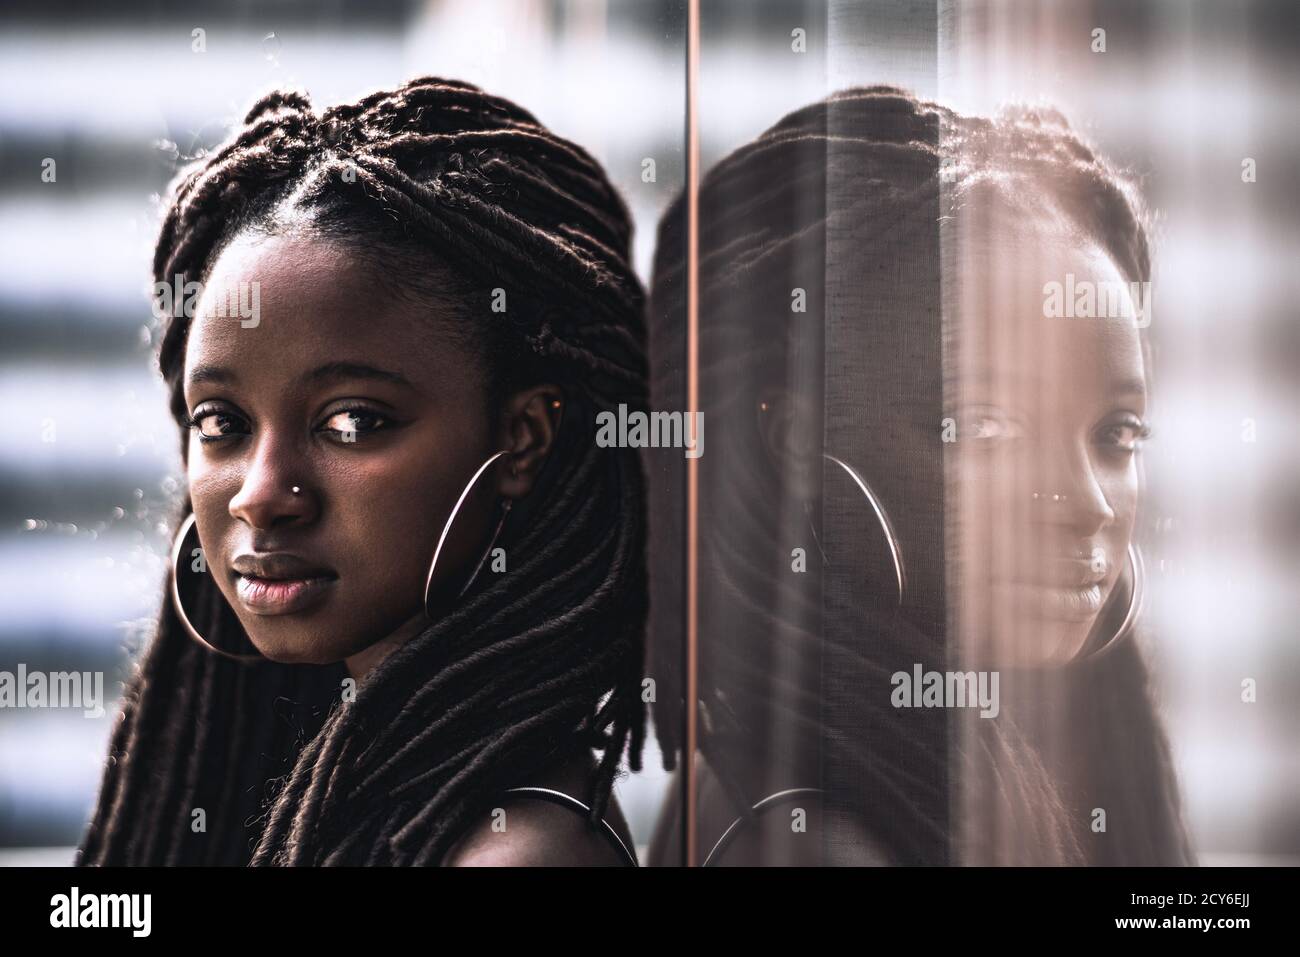 A portrait of a young dazzling African woman with big earrings, nose piercing, and beautiful dreadlocks, she is looking at the camera while leaning ag Stock Photo